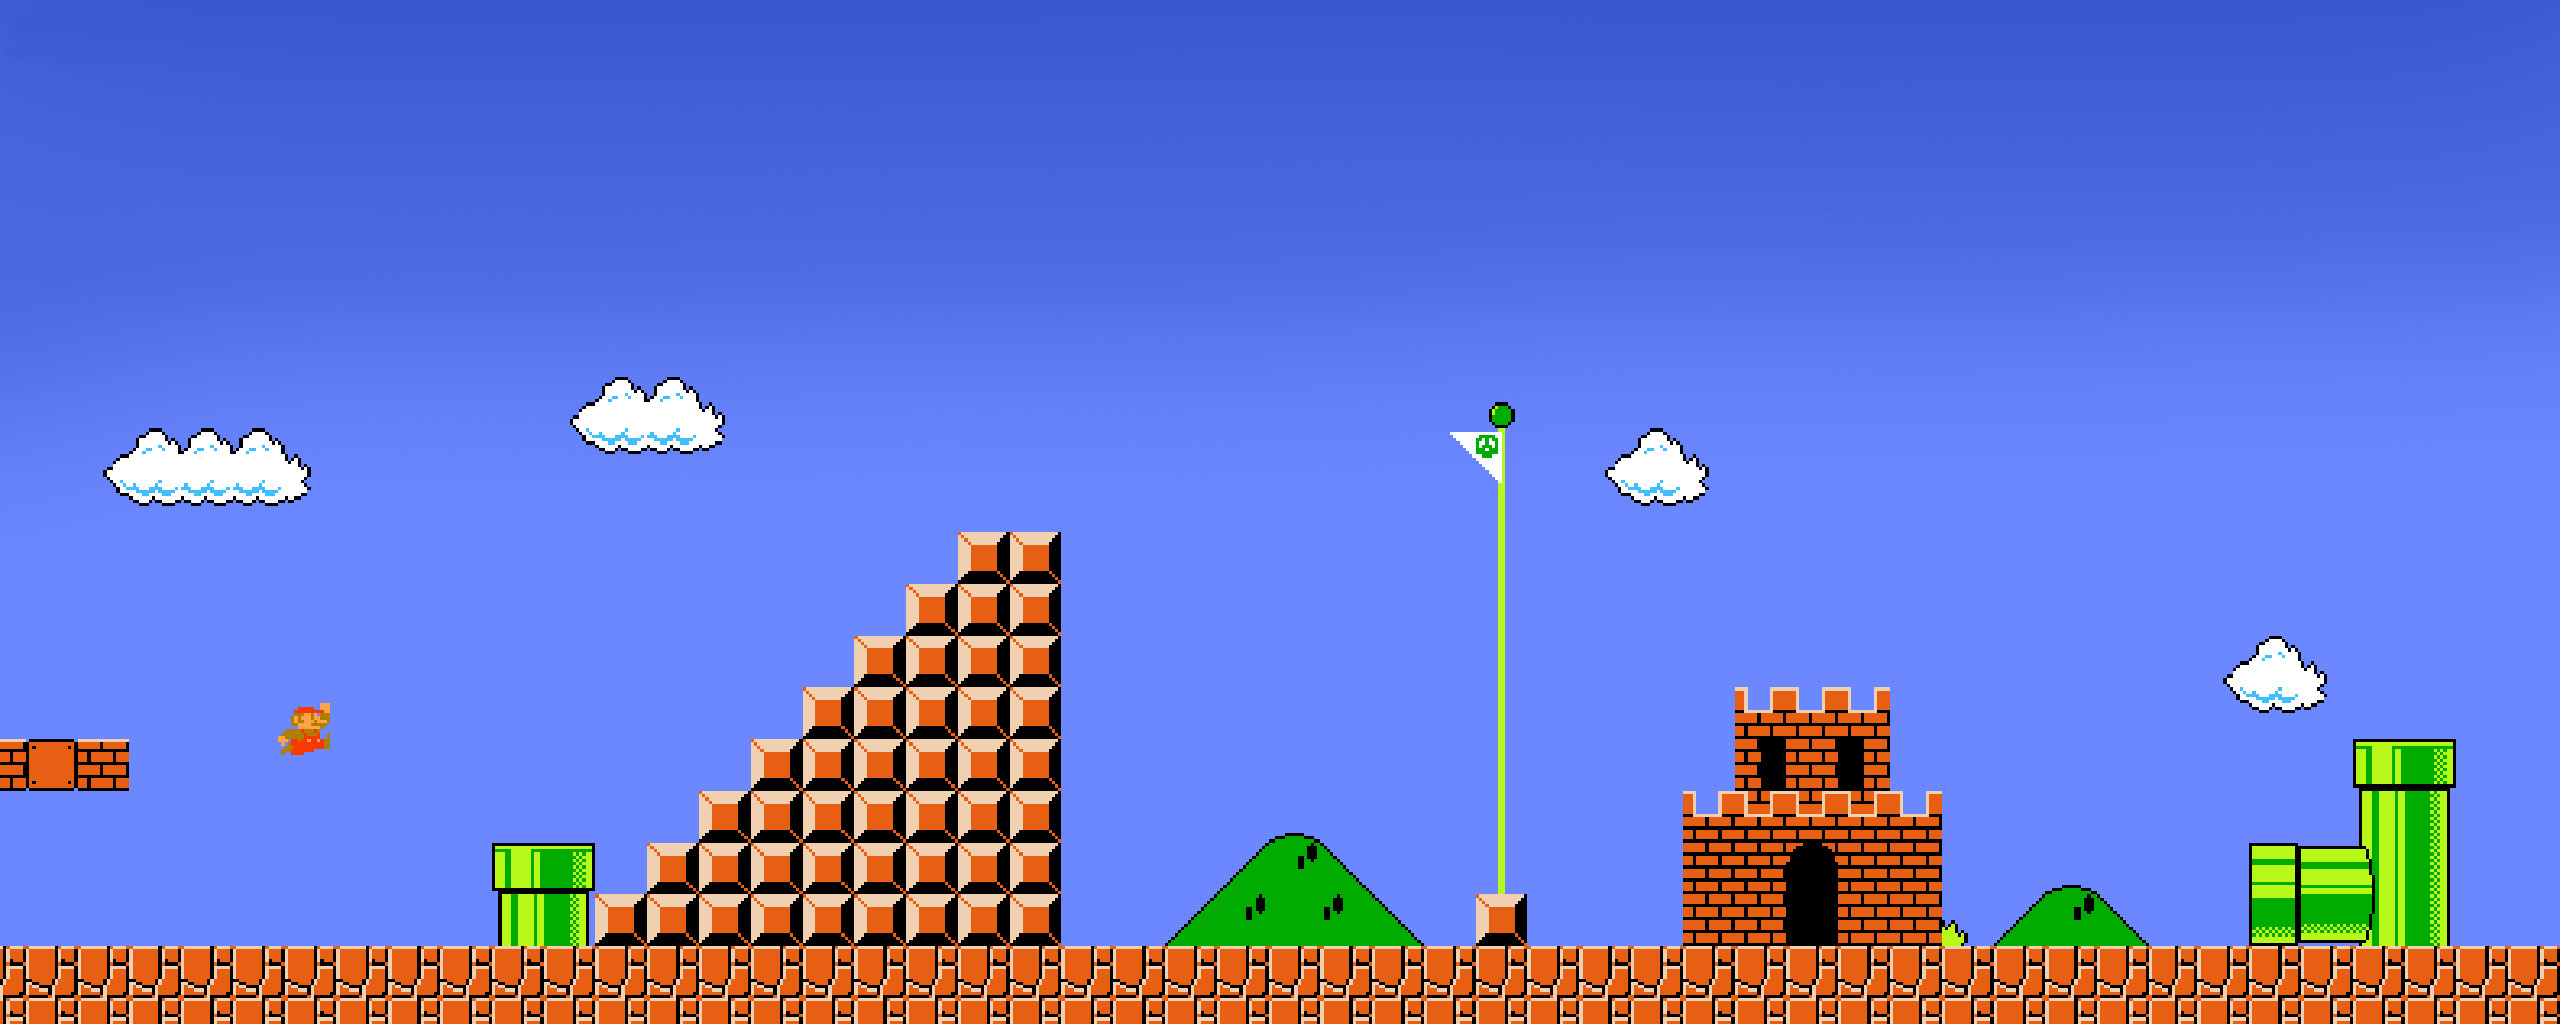 631 Mario HD Wallpapers | Backgrounds - Wallpaper Abyss - Page 6